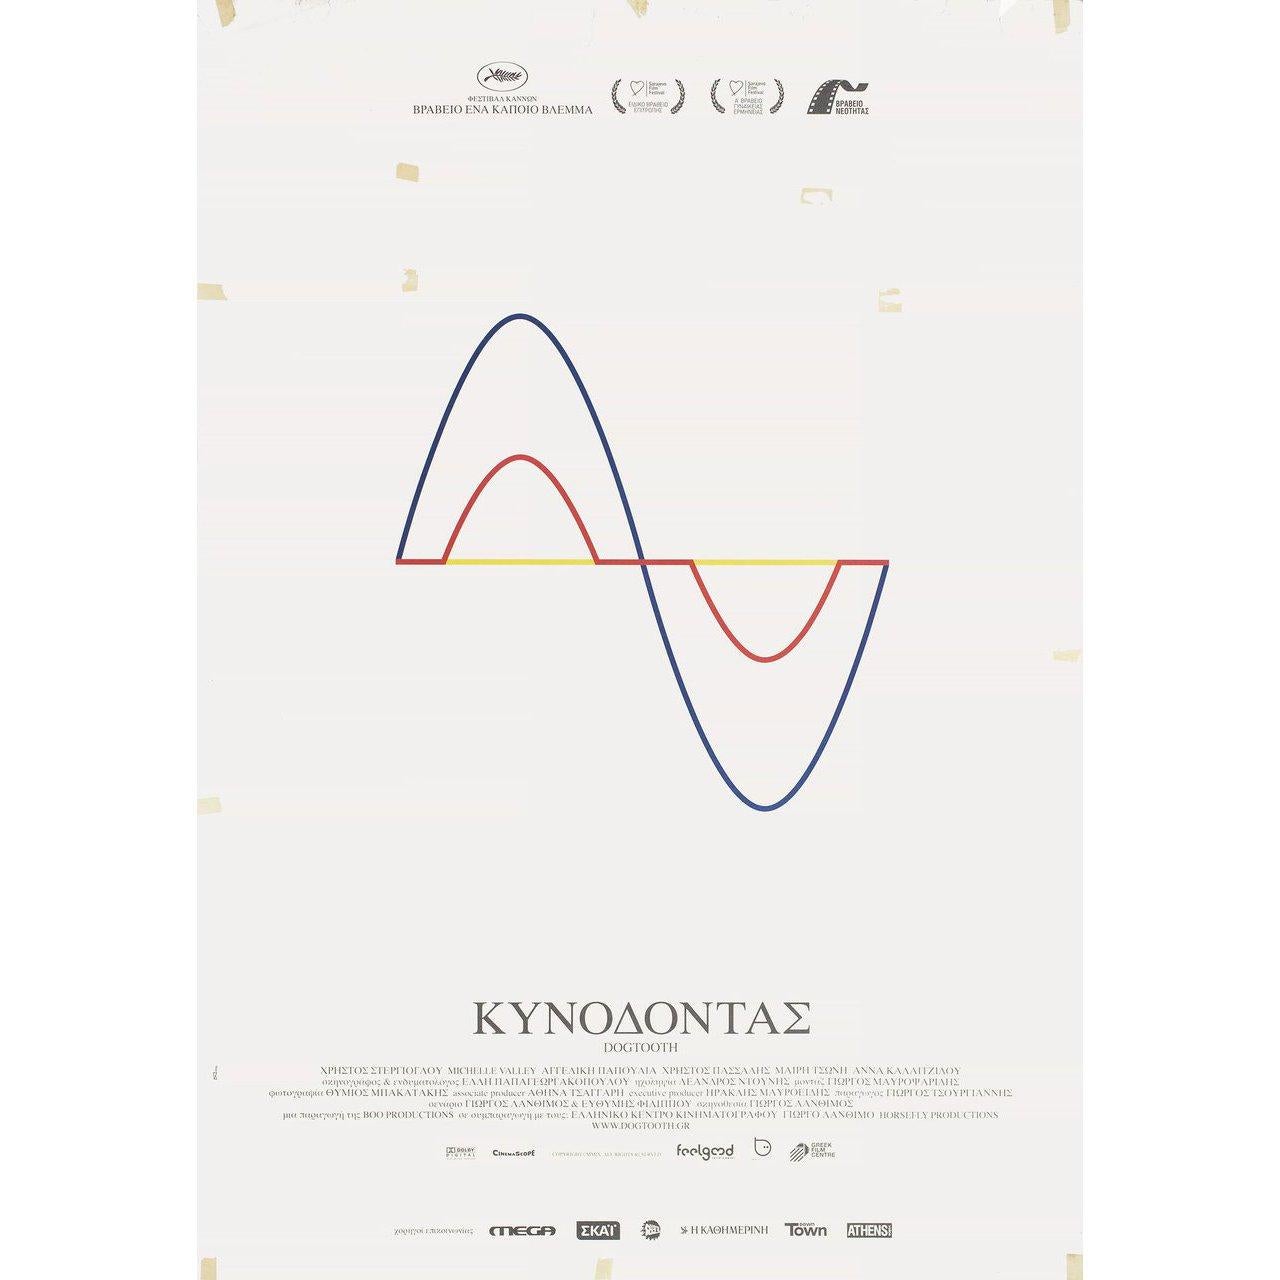 Original 2009 Greek B1 poster by Vasilis Marmatakis for the film Dogtooth (Kynodontas) directed by Yorgos Lanthimos with Christos Stergioglou / Michele Valley / Aggeliki Papoulia / Hristos Passalis. Good-Very Good condition, folded with tape stains